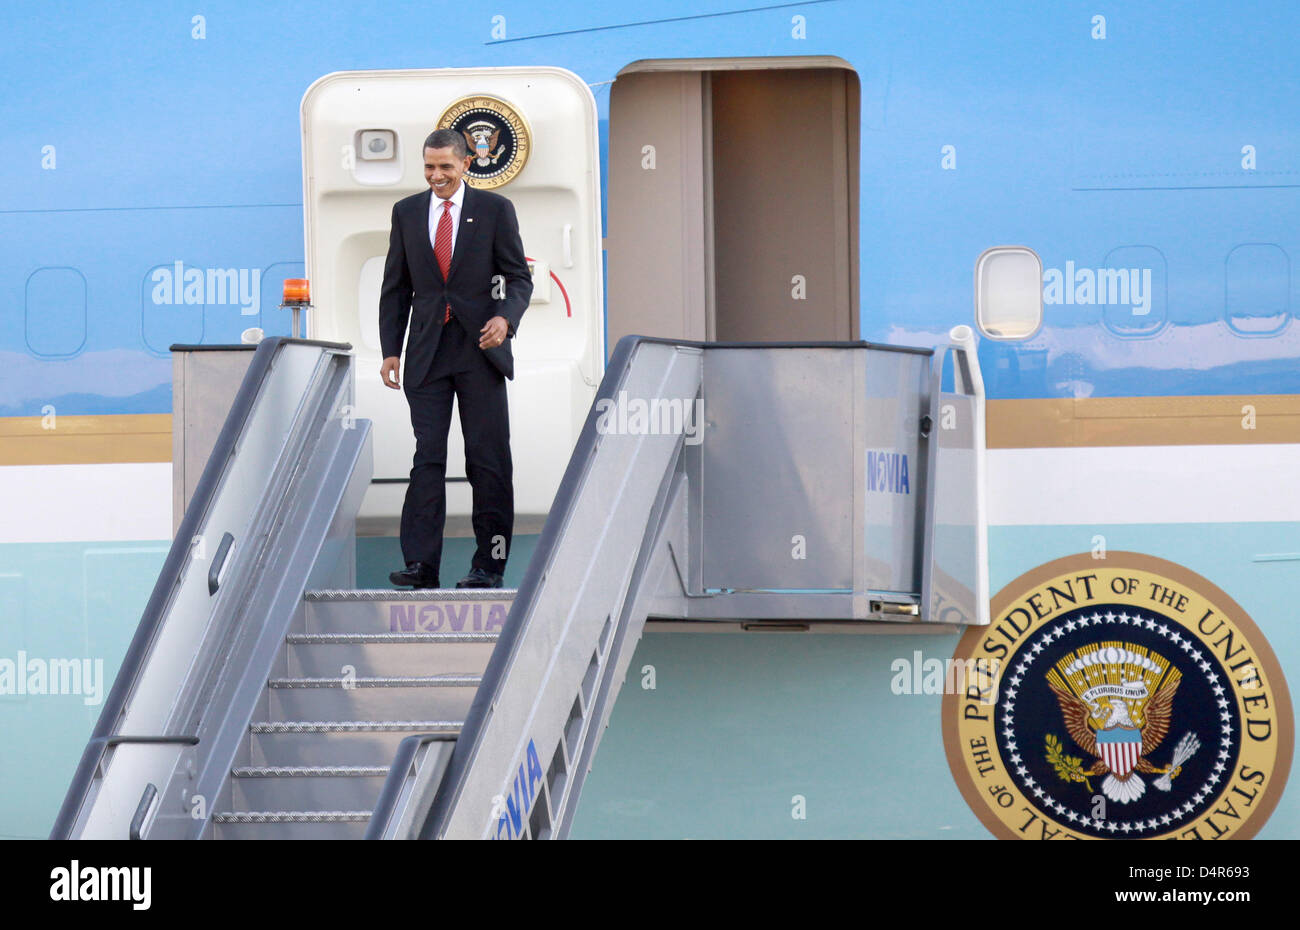 US President Barack Obama deboards Air Force One at the aiport of  Copenhagen, Denmark, 02 October 2009. The First Lady and President Obama  were in Copenhagen to deliver speeches on Chicago?s bid